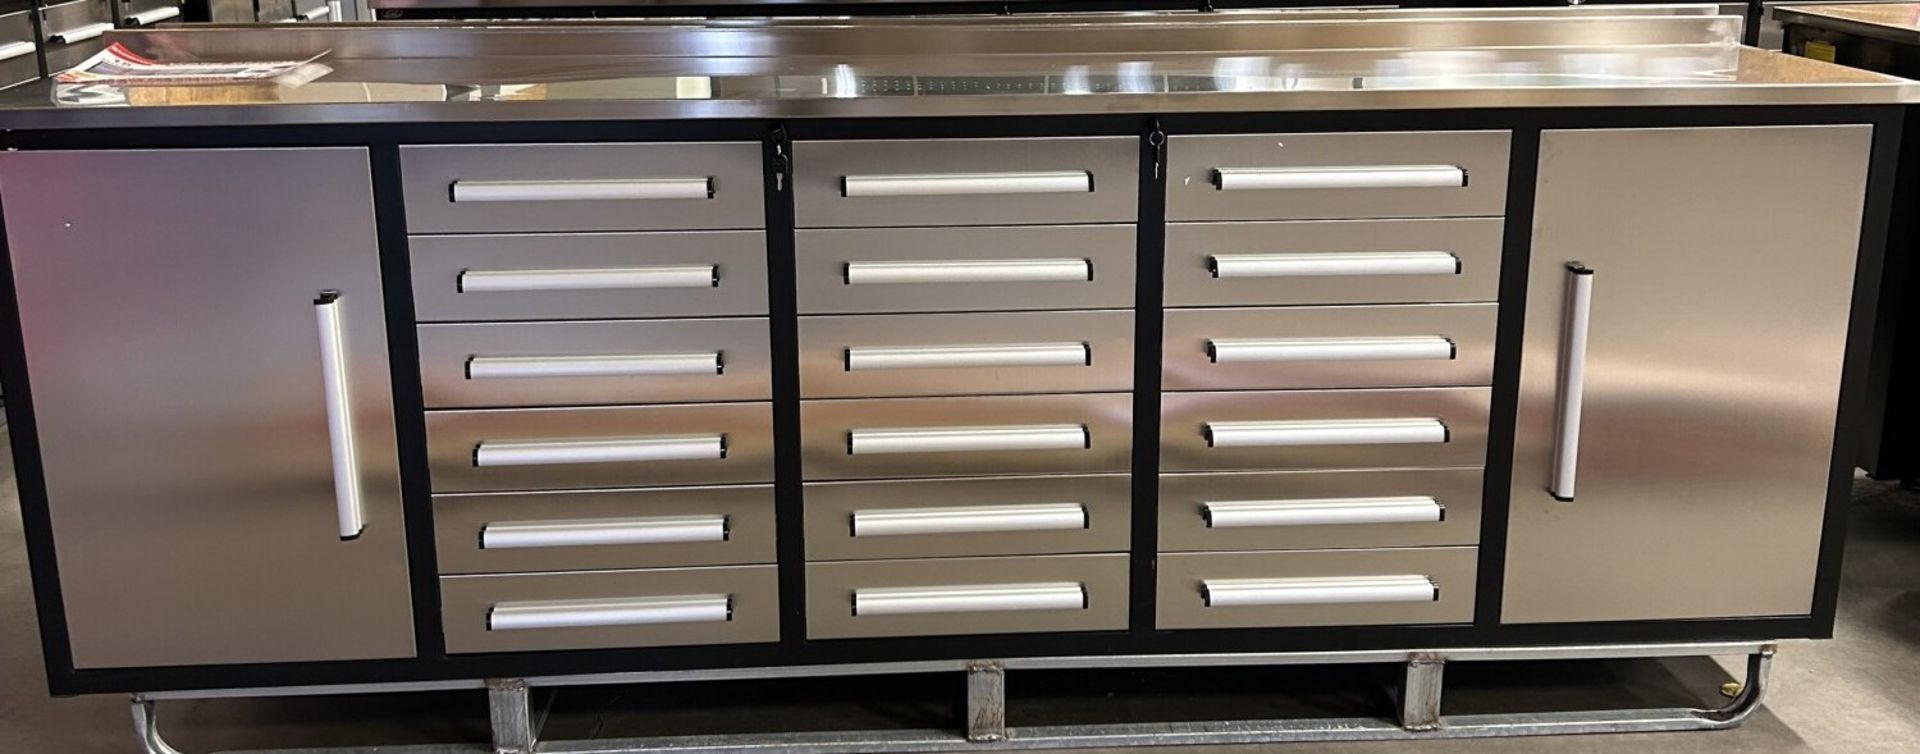 UNUSED 2024 STEELMAN 7FT WORK BENCH WITH 10 DRAWERS & 2 CABINETS. 87 X 23 X 39 INCH. PACKED IN